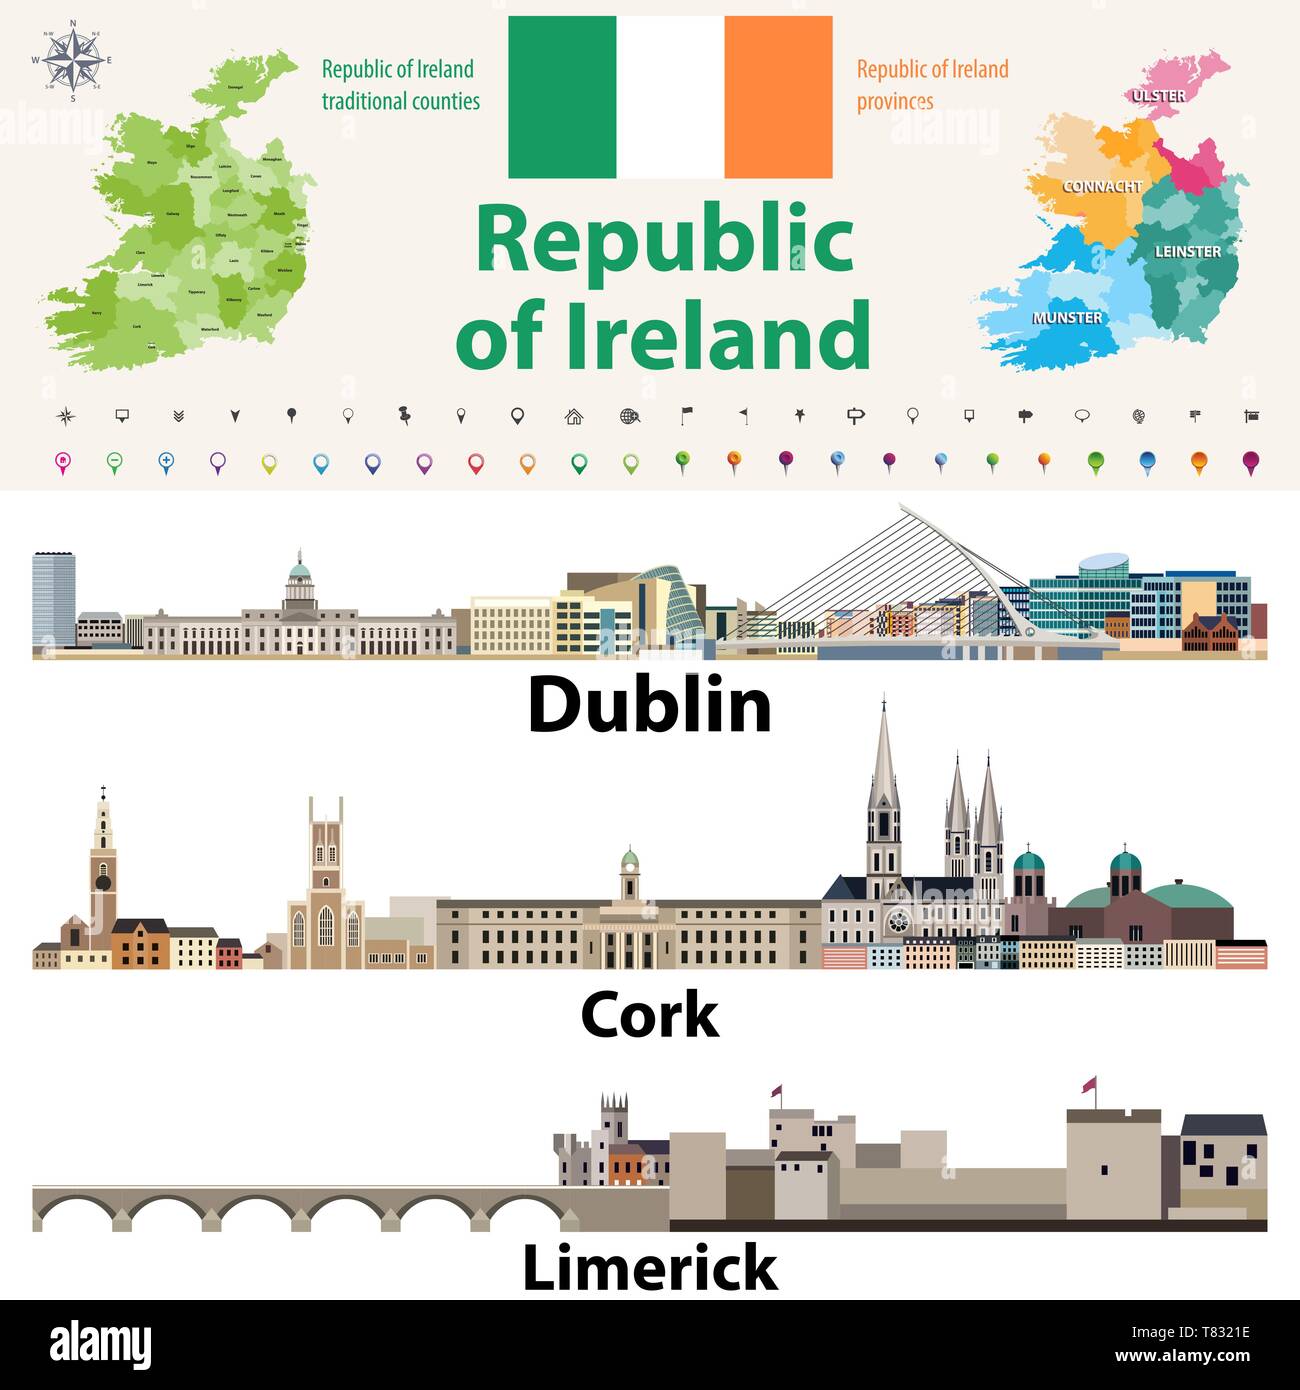 Republic of Ireland traditional countries and provinces map and Irish largest cities skylines Stock Vector